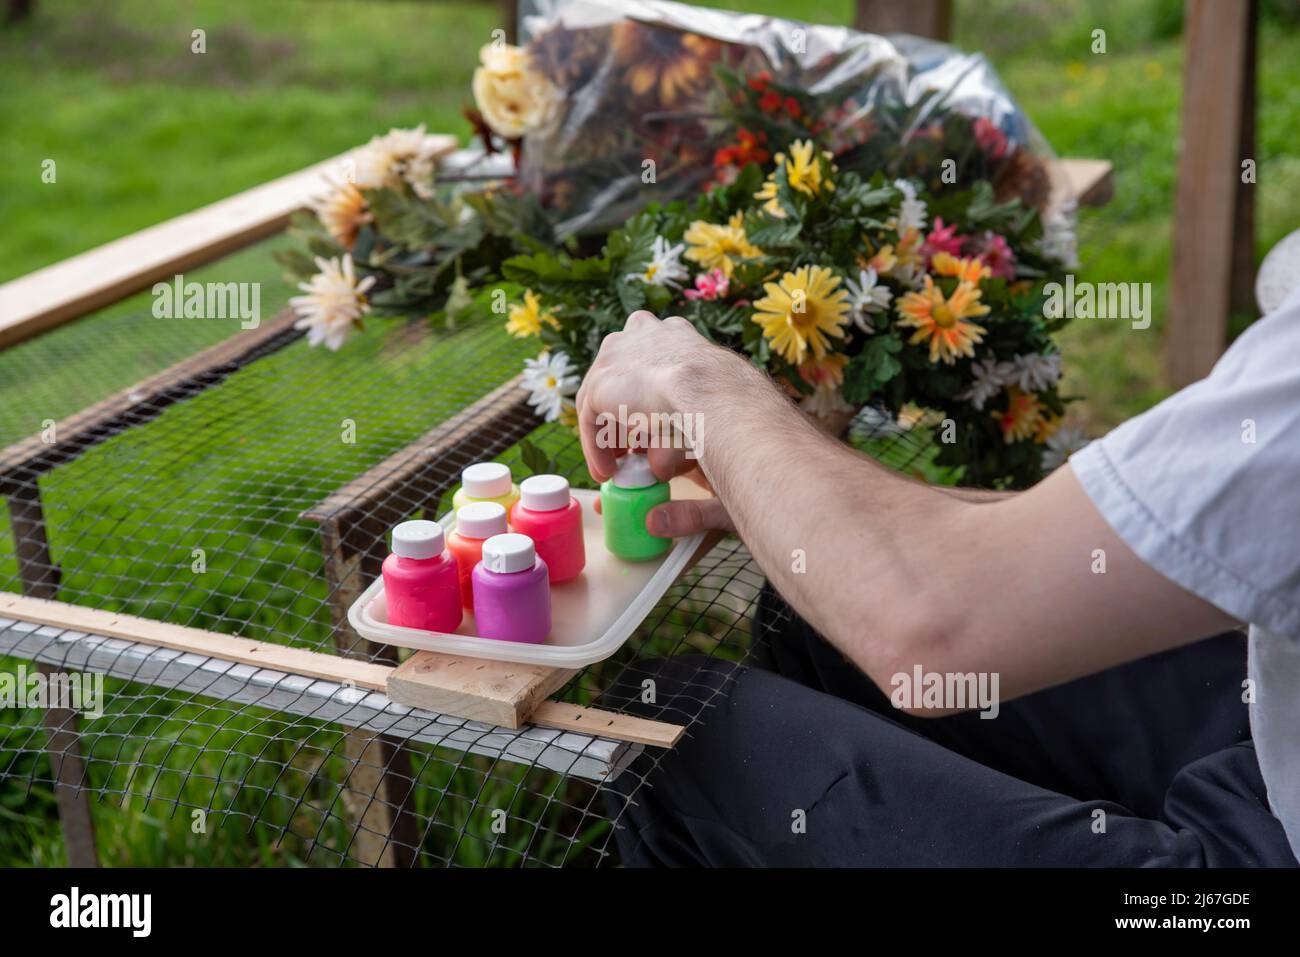 Adult arts and crafts art therapy creativity concept, man paints silk flowers in calm outdoor setting with green grass background and crutches leaning Stock Photo